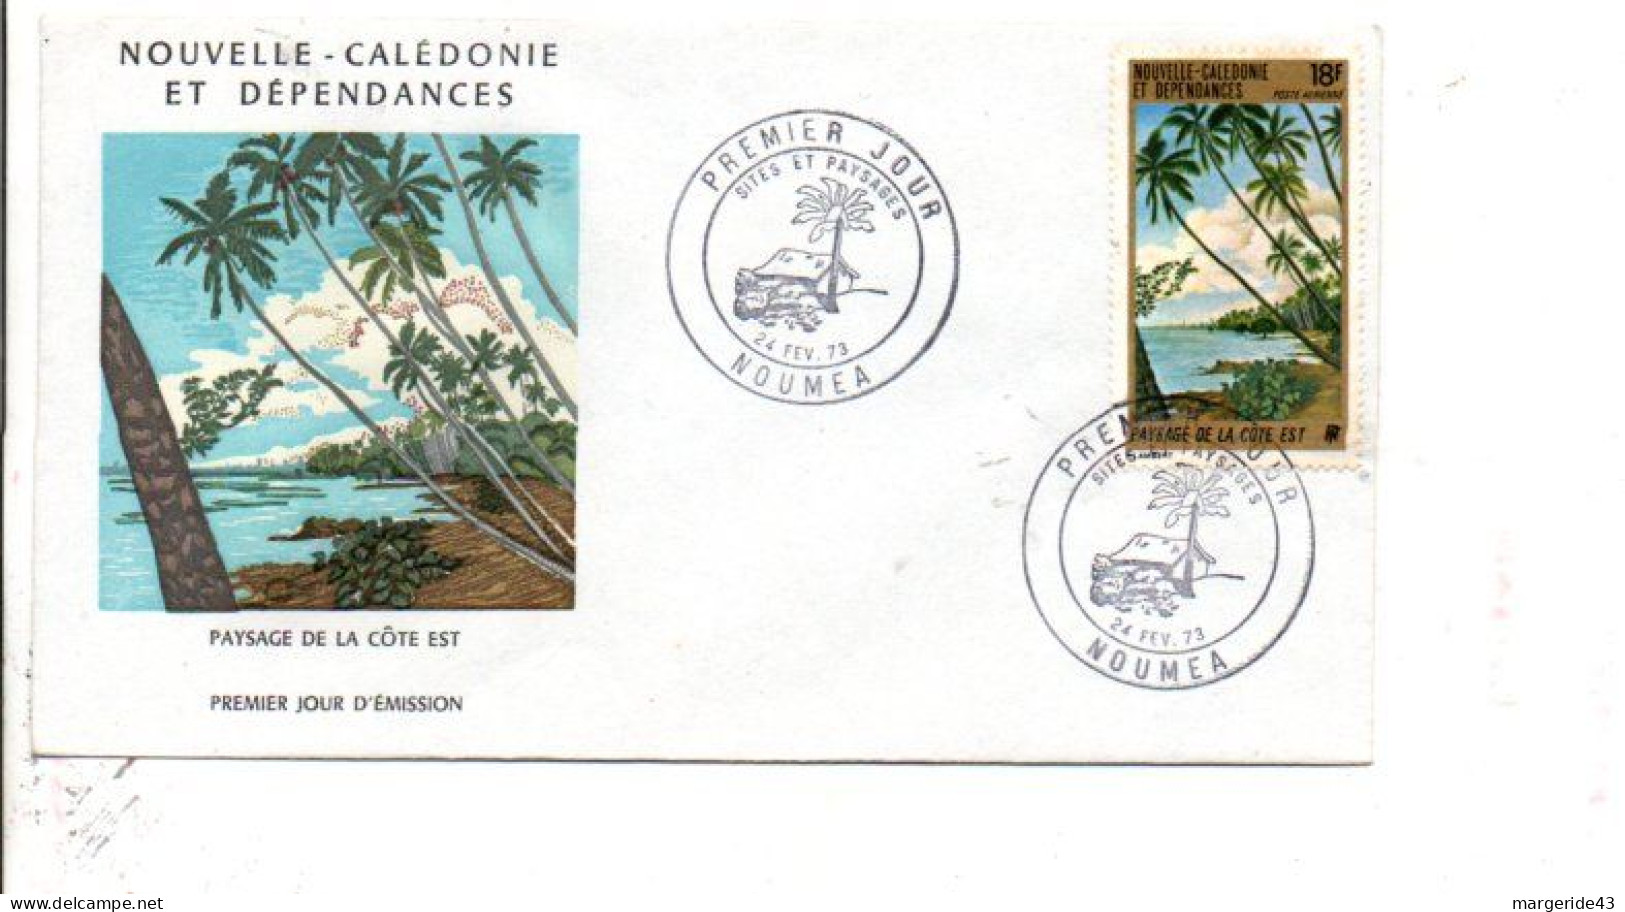 NOUVELLE CALEDONIE FDC 1973 PAYSAGES - FDC